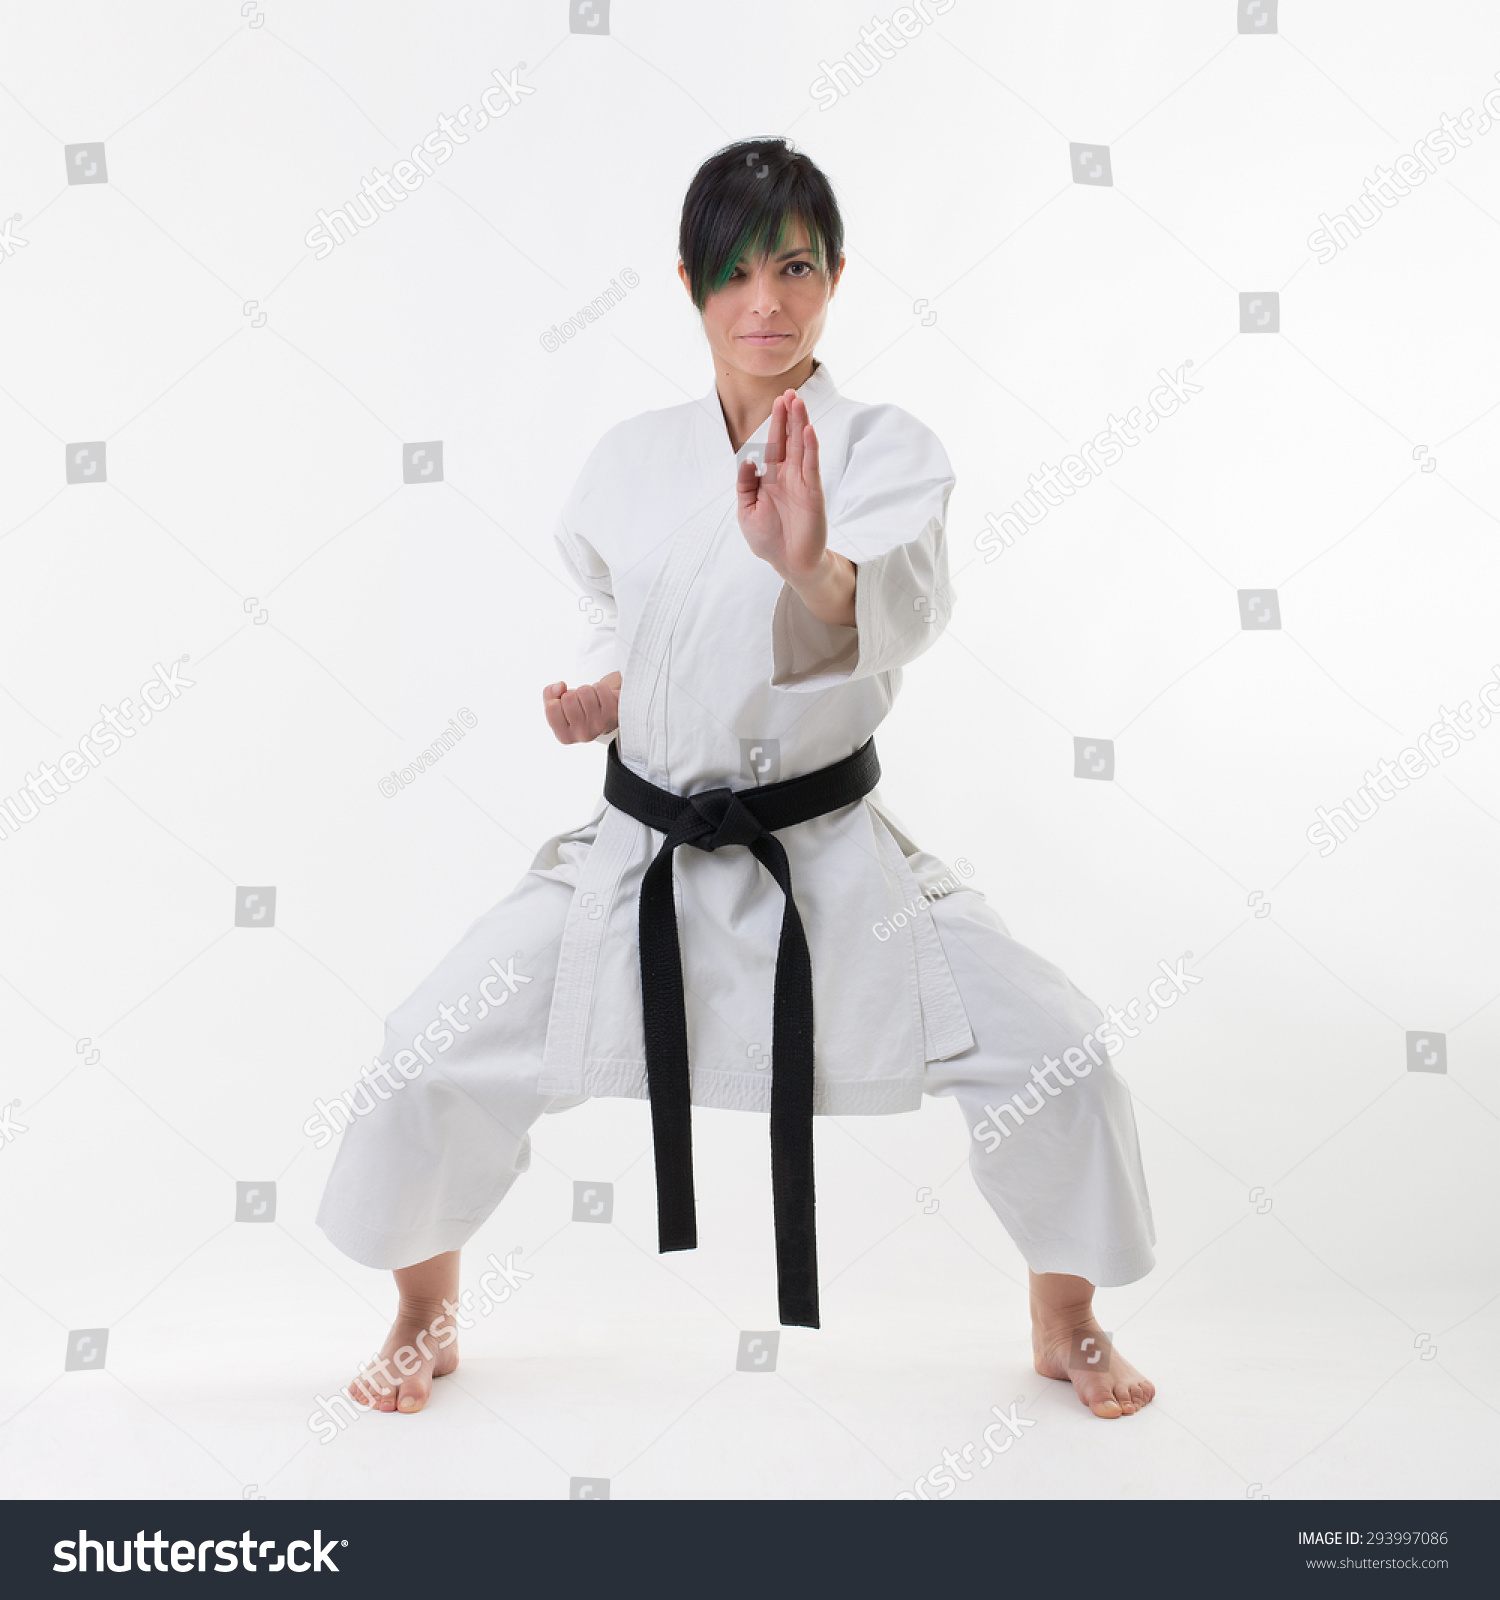 Young Black Belt Fighter Training Karate Stock Photo 293997086 ...